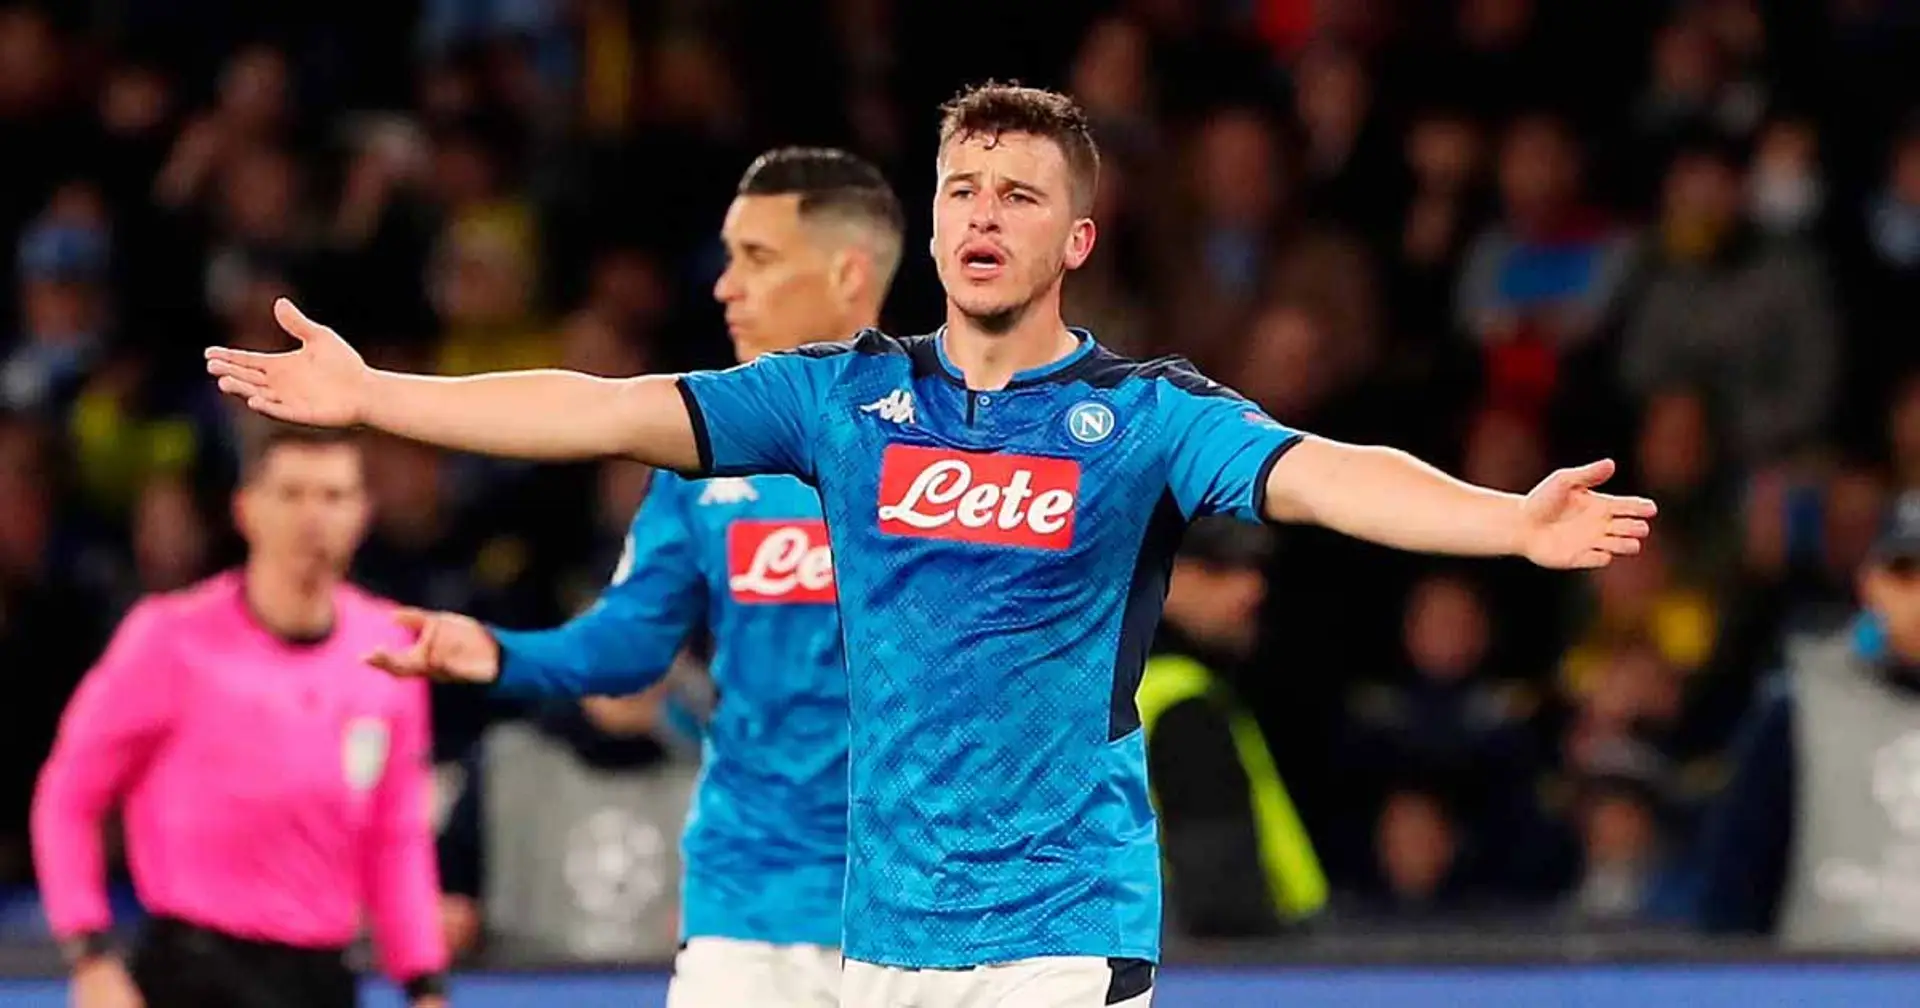 Napoli's Demme: 'In the second leg the odds are 50-50'